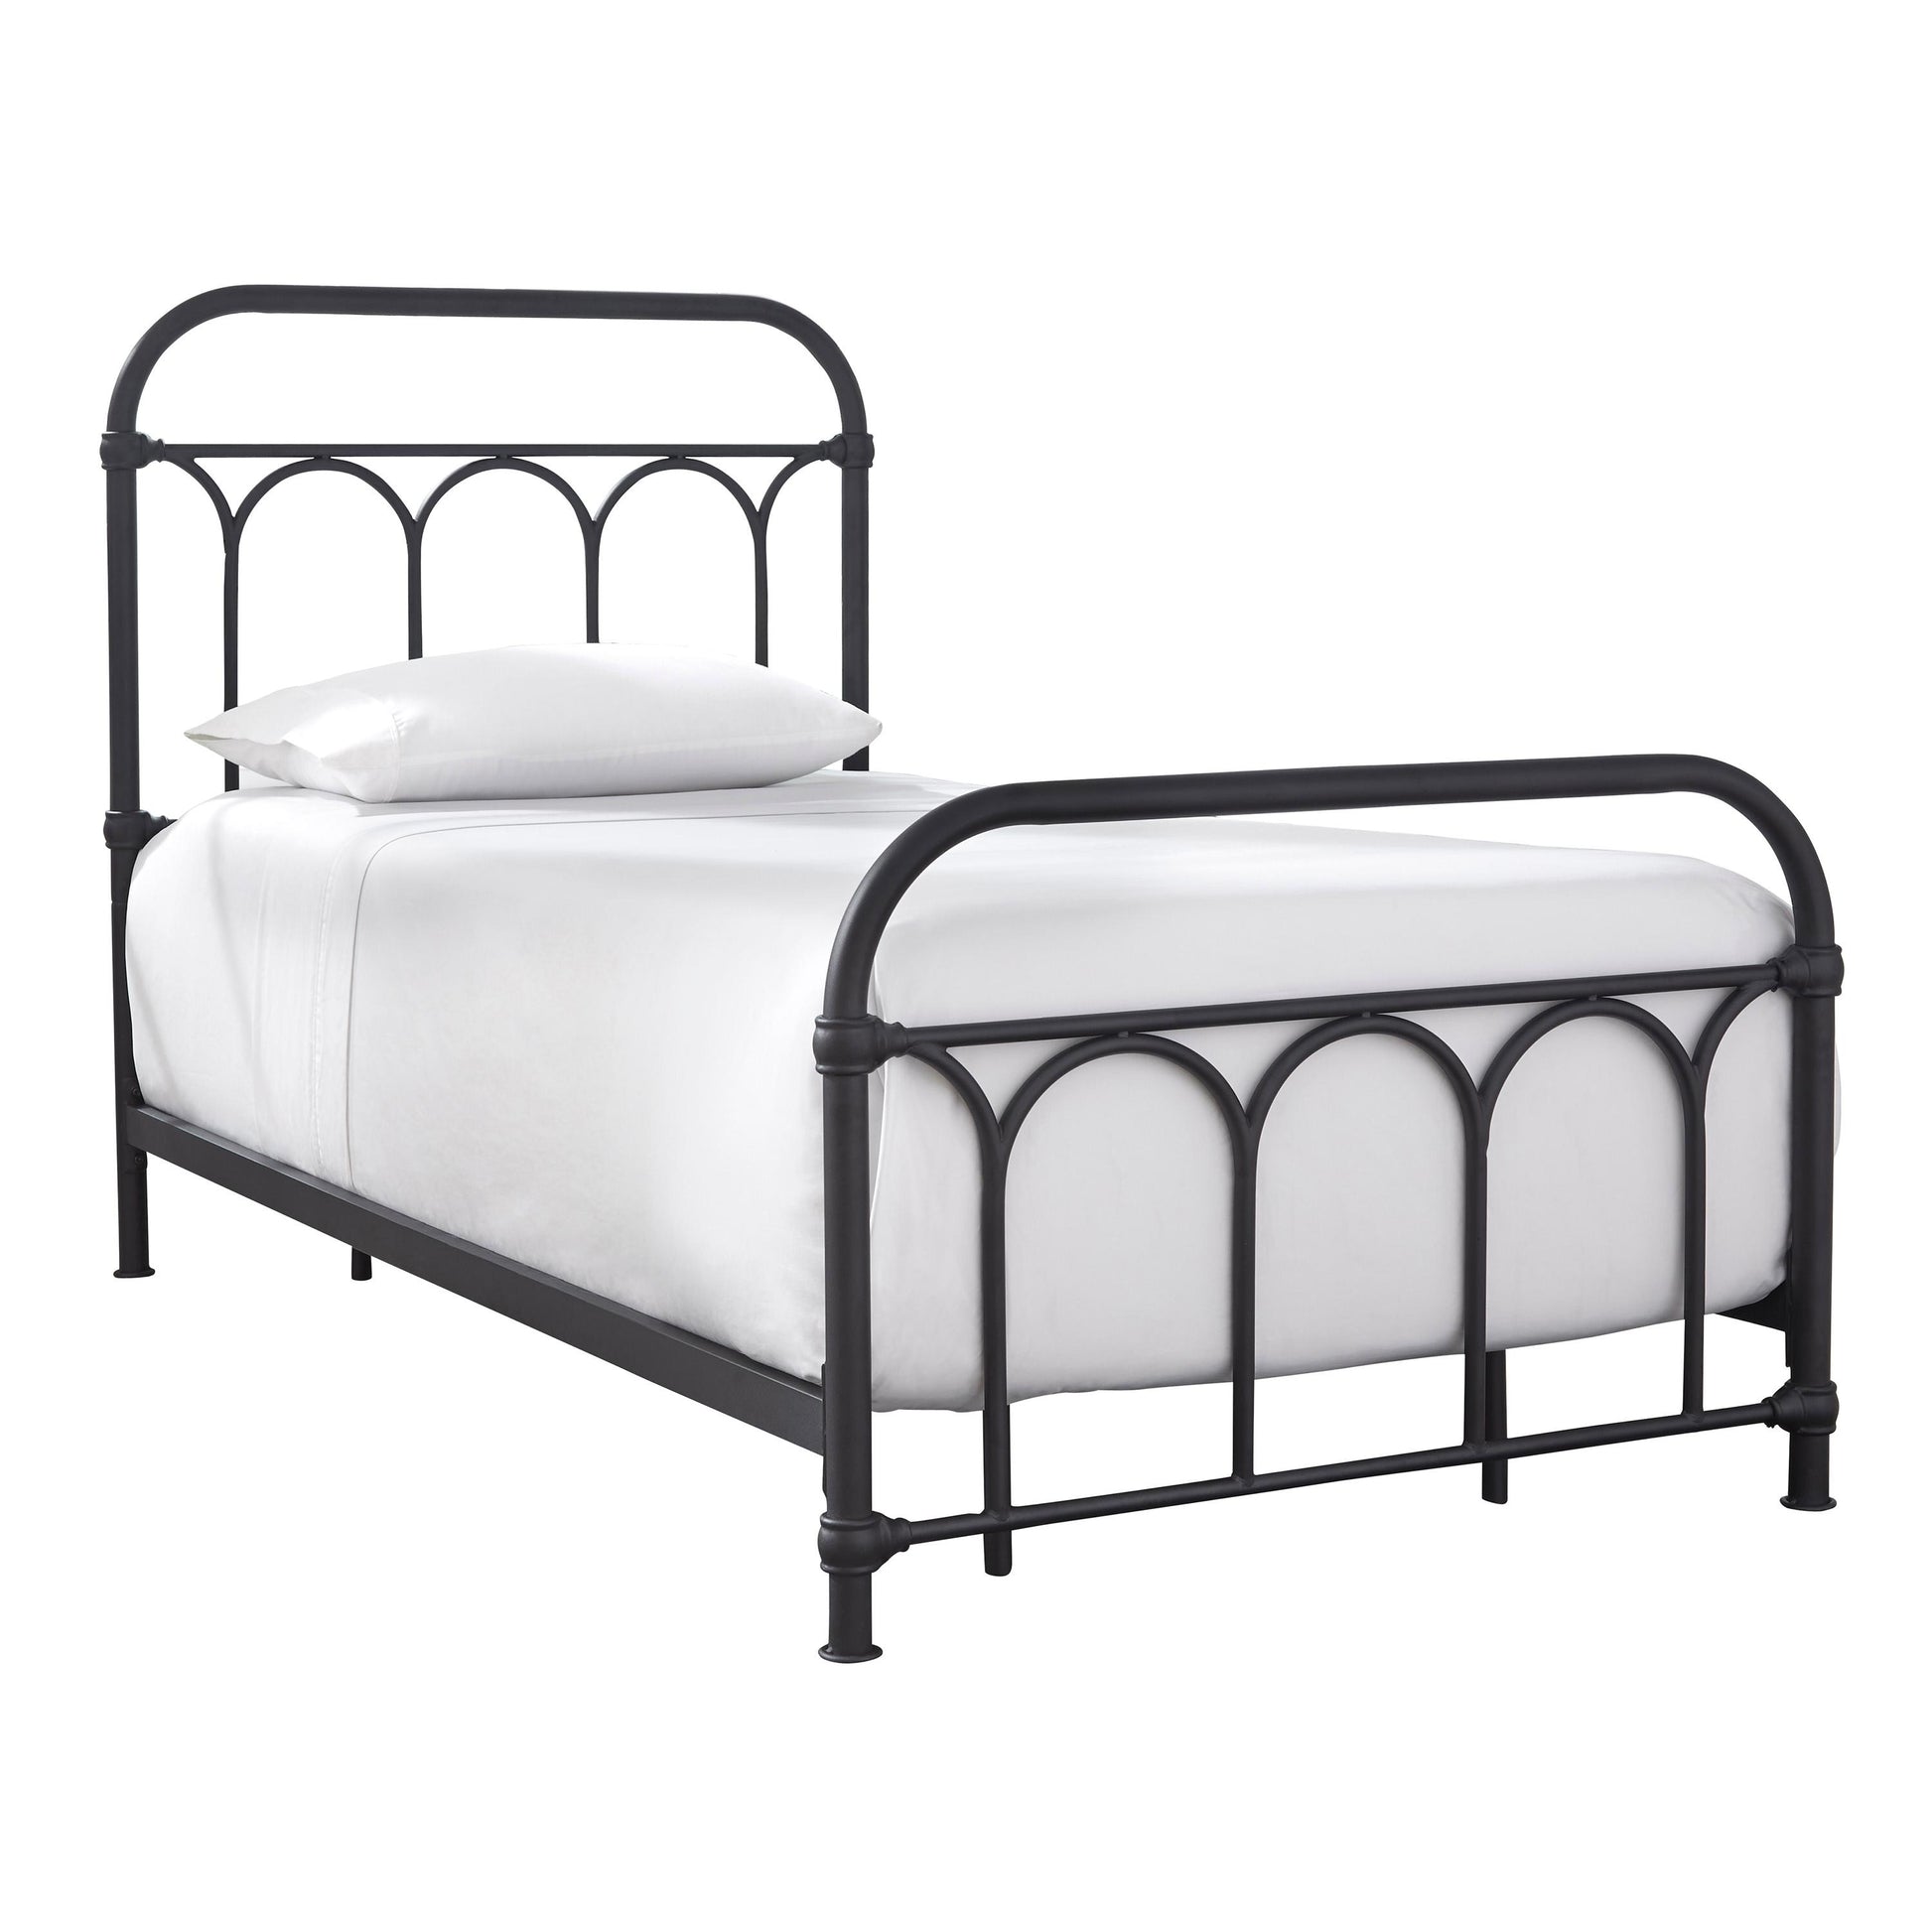 Signature Design by Ashley Nashburg Twin Metal Bed B280-671 IMAGE 1